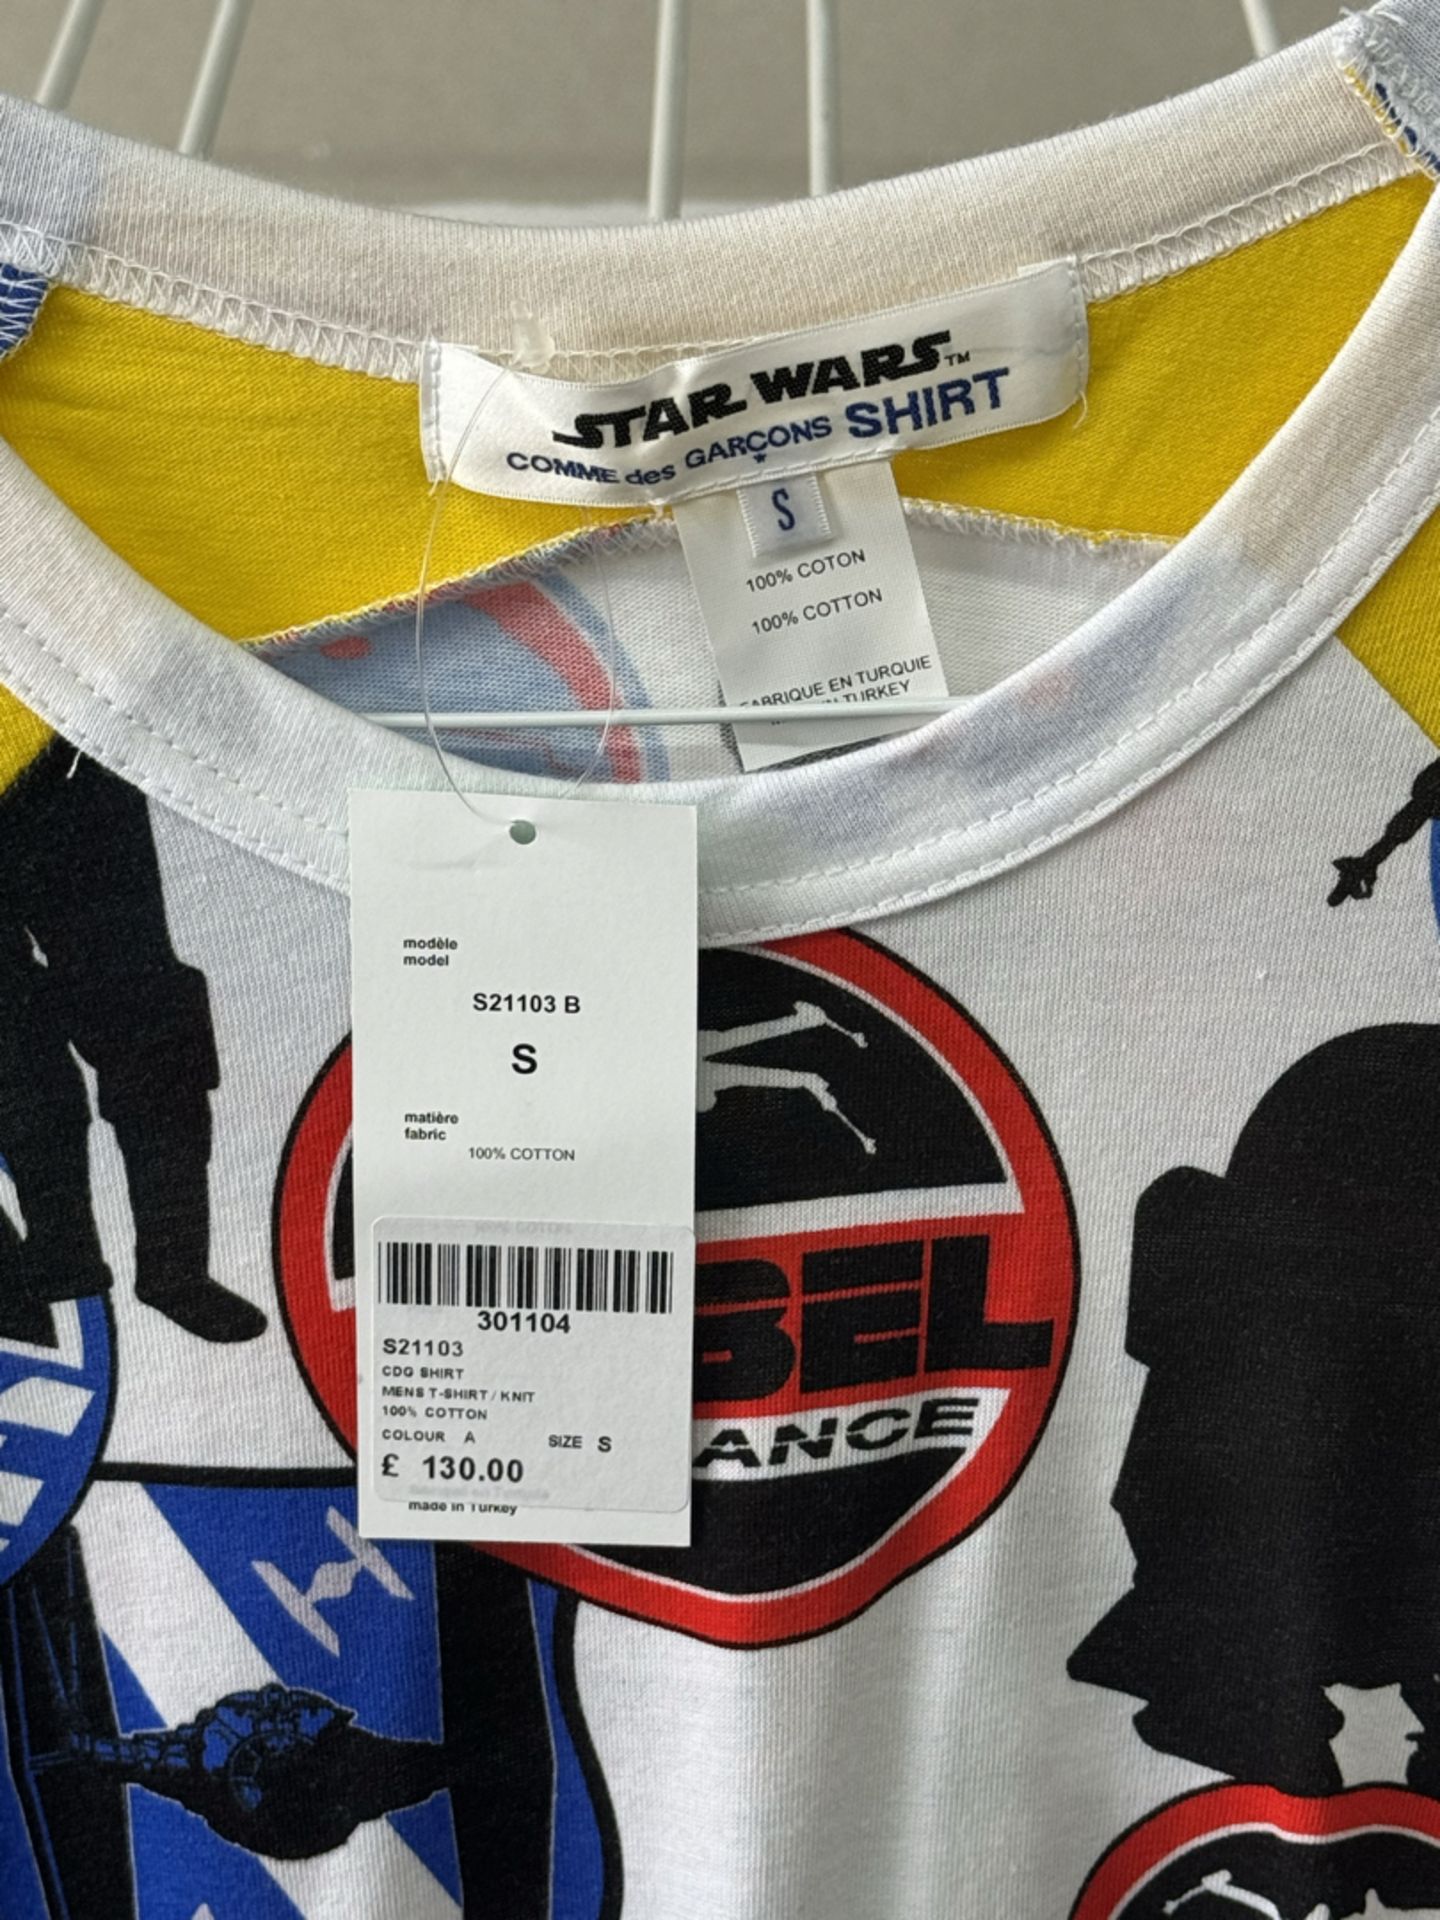 Comme Des Garcons Mens Star Wars T-Shirt - New with Tags - Size Small (/medium) - RRP £130 - NO VAT! - Image 2 of 3